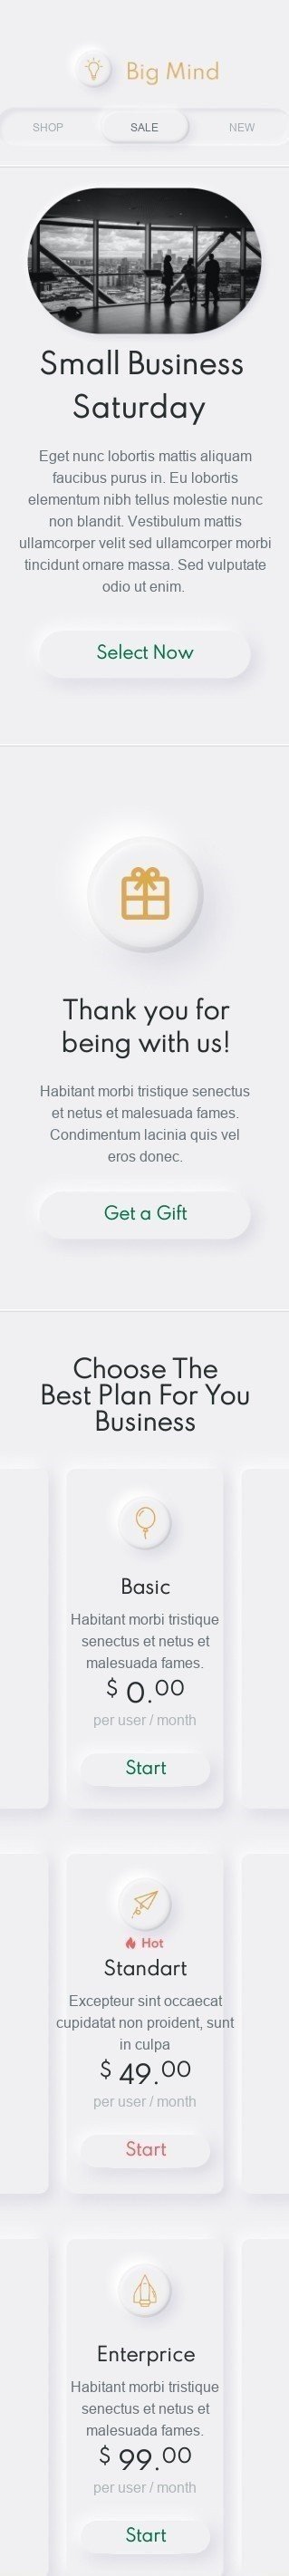 Small Business Saturday Email Template "Neomorphism" for Business industry mobile view